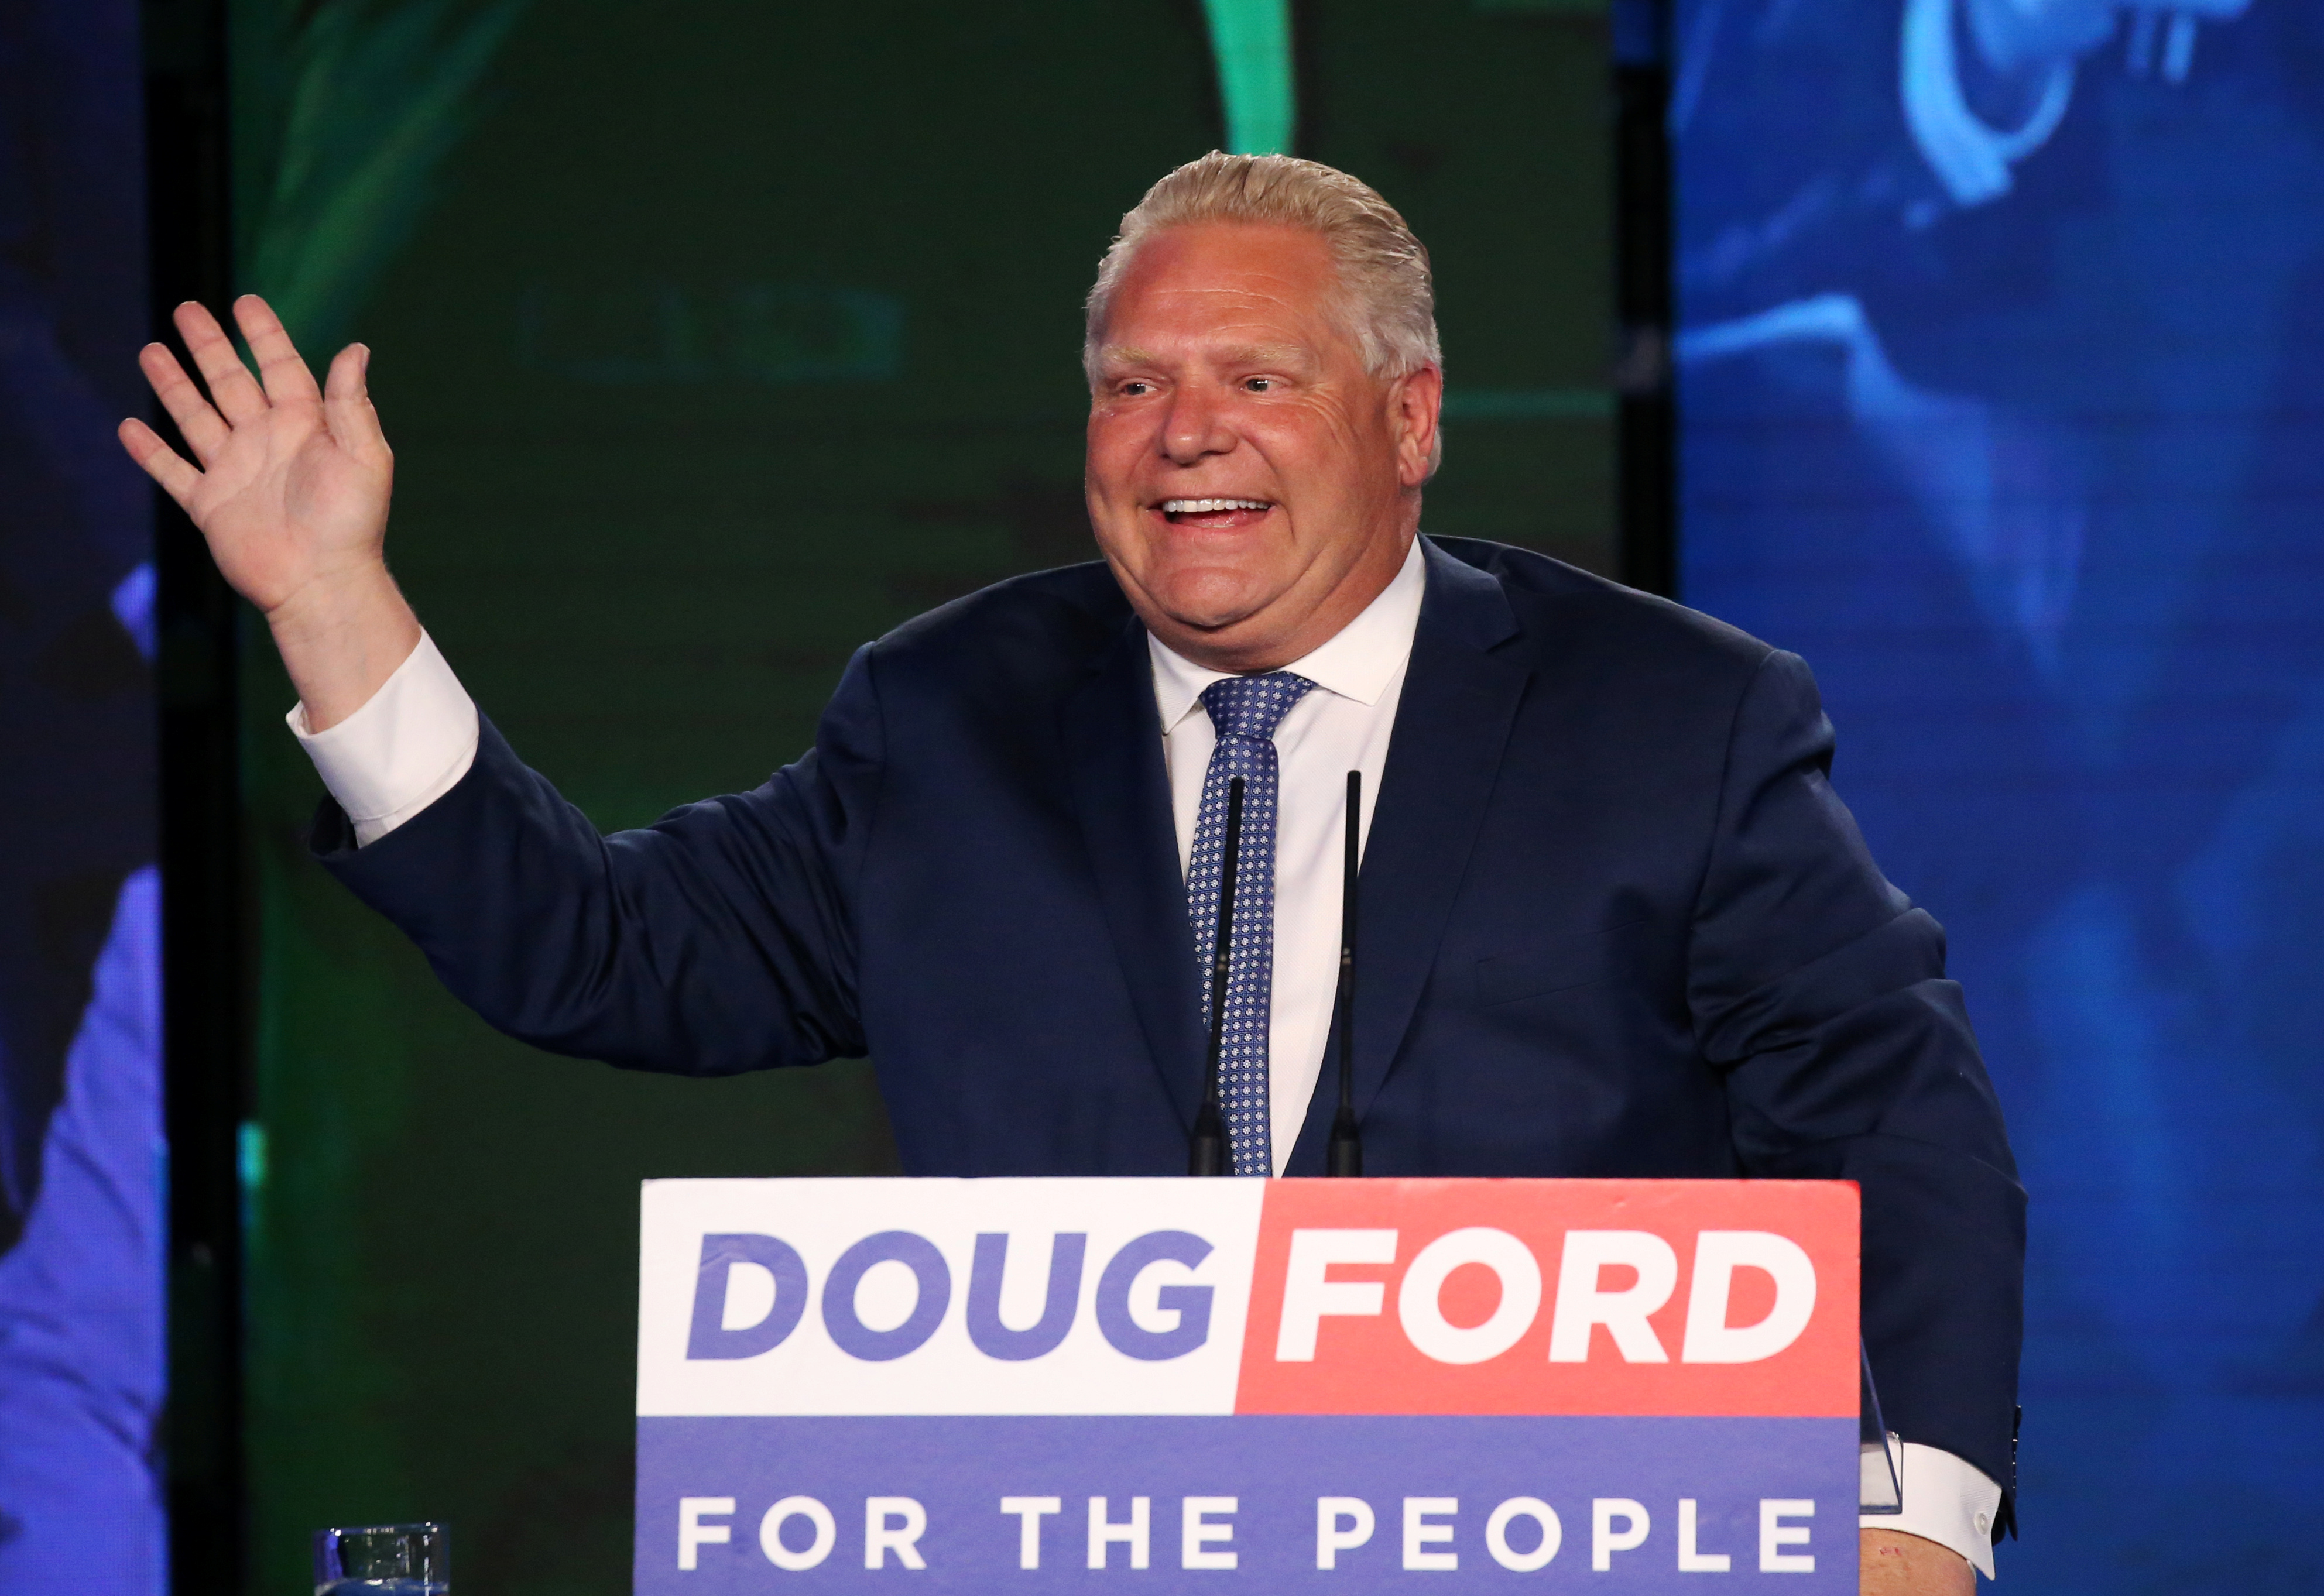 Progressive Conservative (PC) leader Doug Ford attends his election night party following the provincial election in Toronto